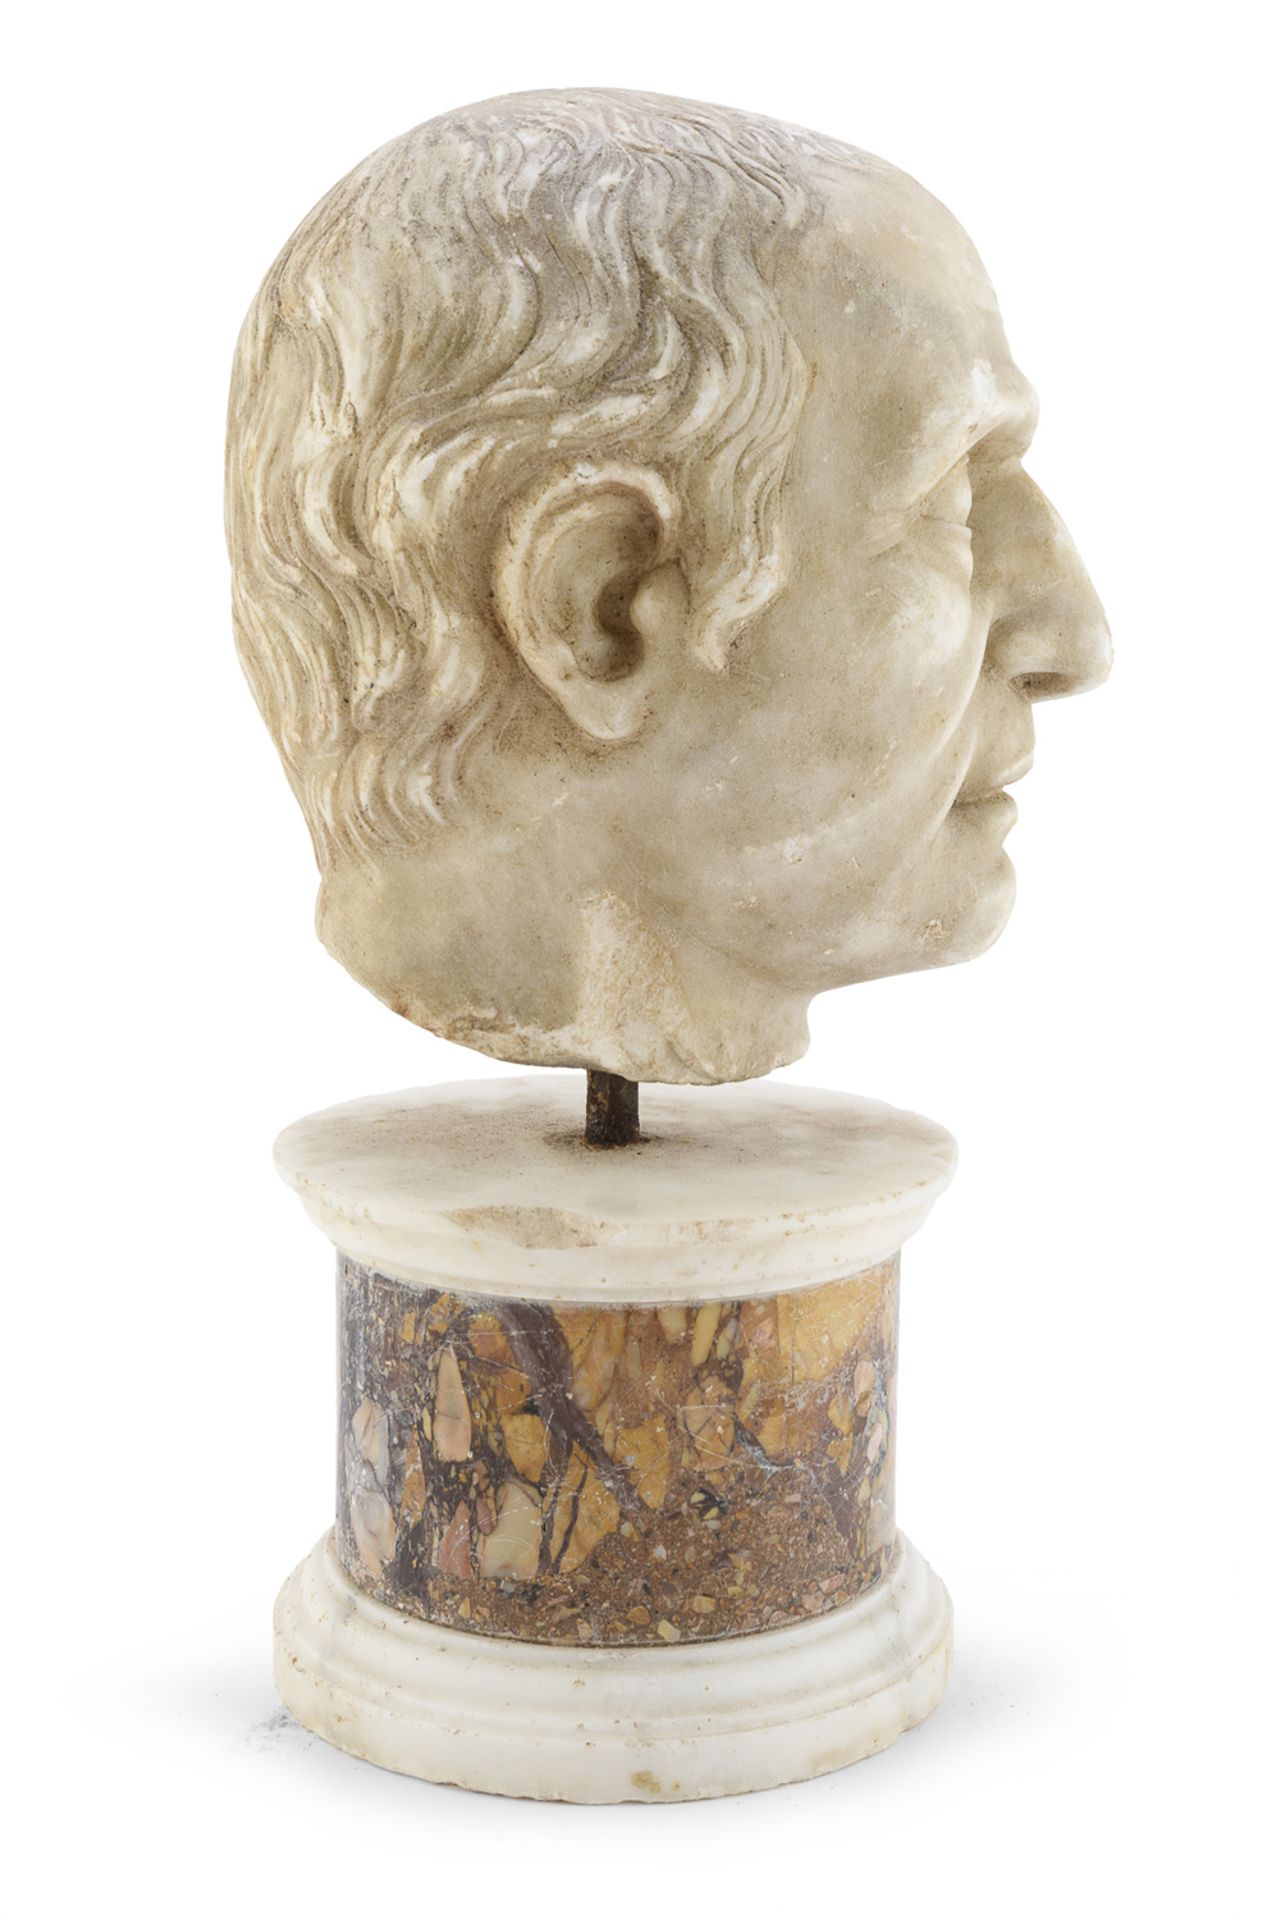 HEAD OF CAESAR IN WHITE MARBLE - Image 2 of 2